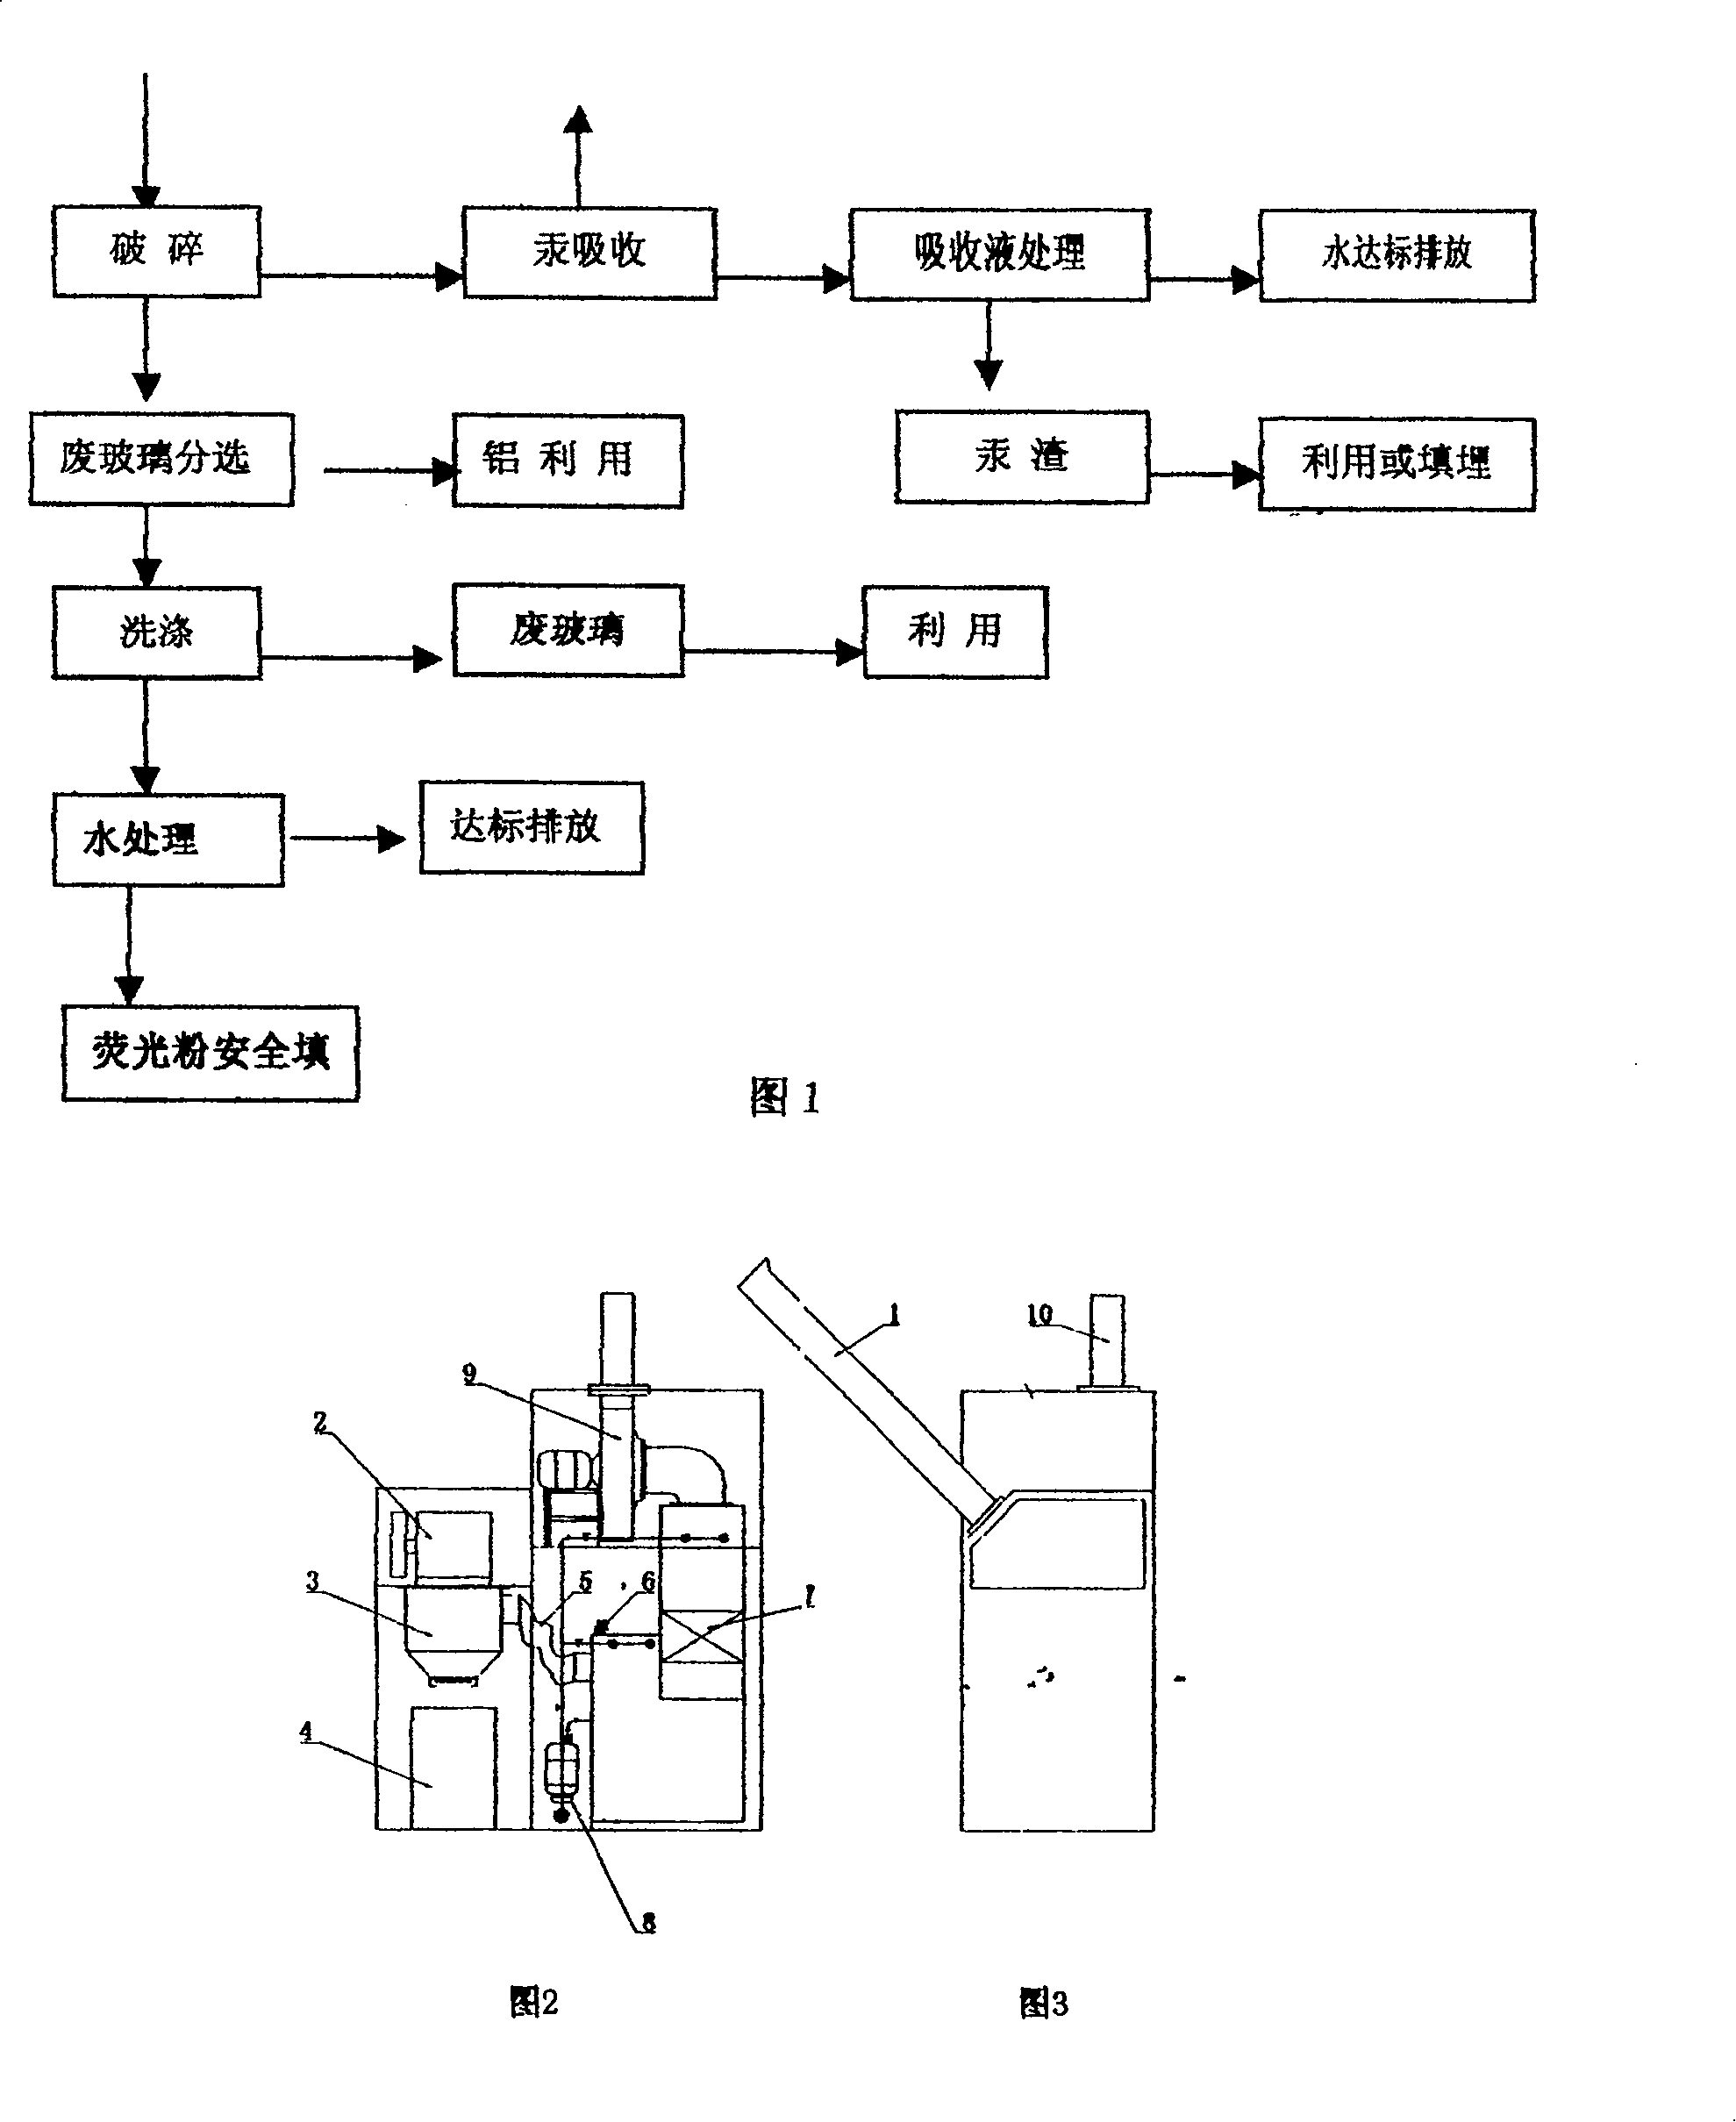 Method for processing worn-out fluorescent tube